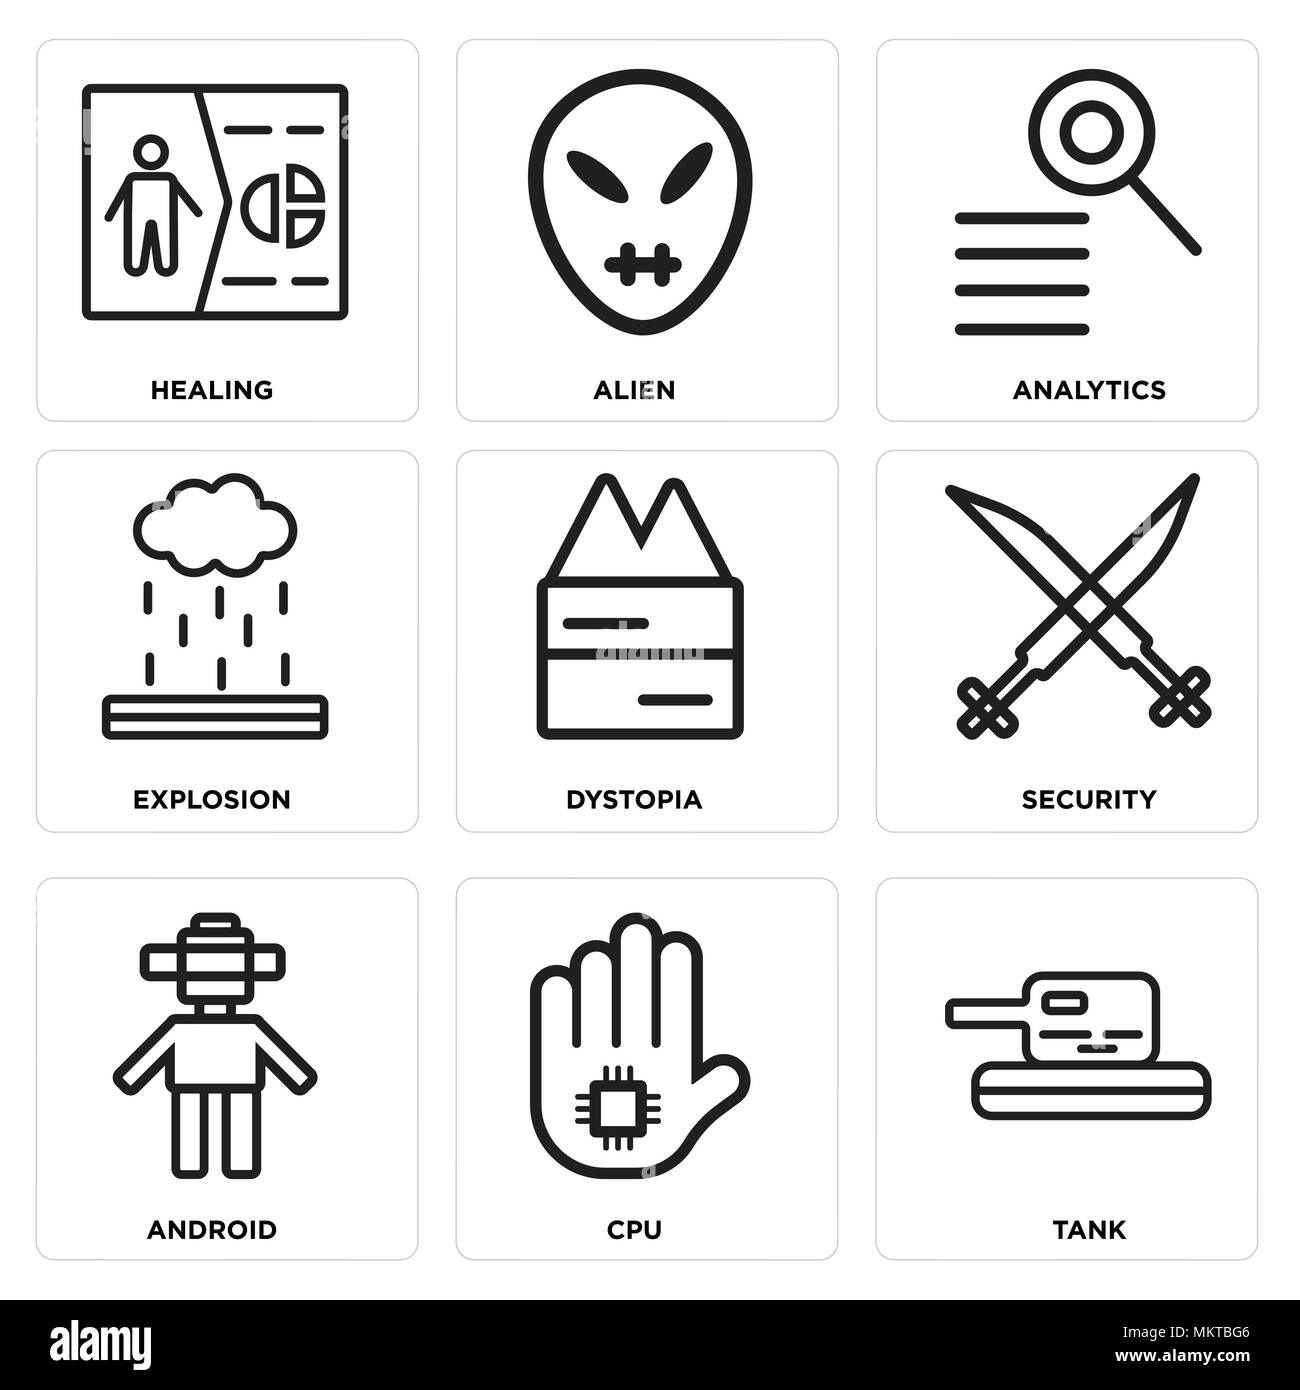 Set Of 9 simple editable icons such as Tank, Cpu, Android, Security, Dystopia, Explosion, Analytics, Alien, Healing, can be used for mobile, web Stock Vector